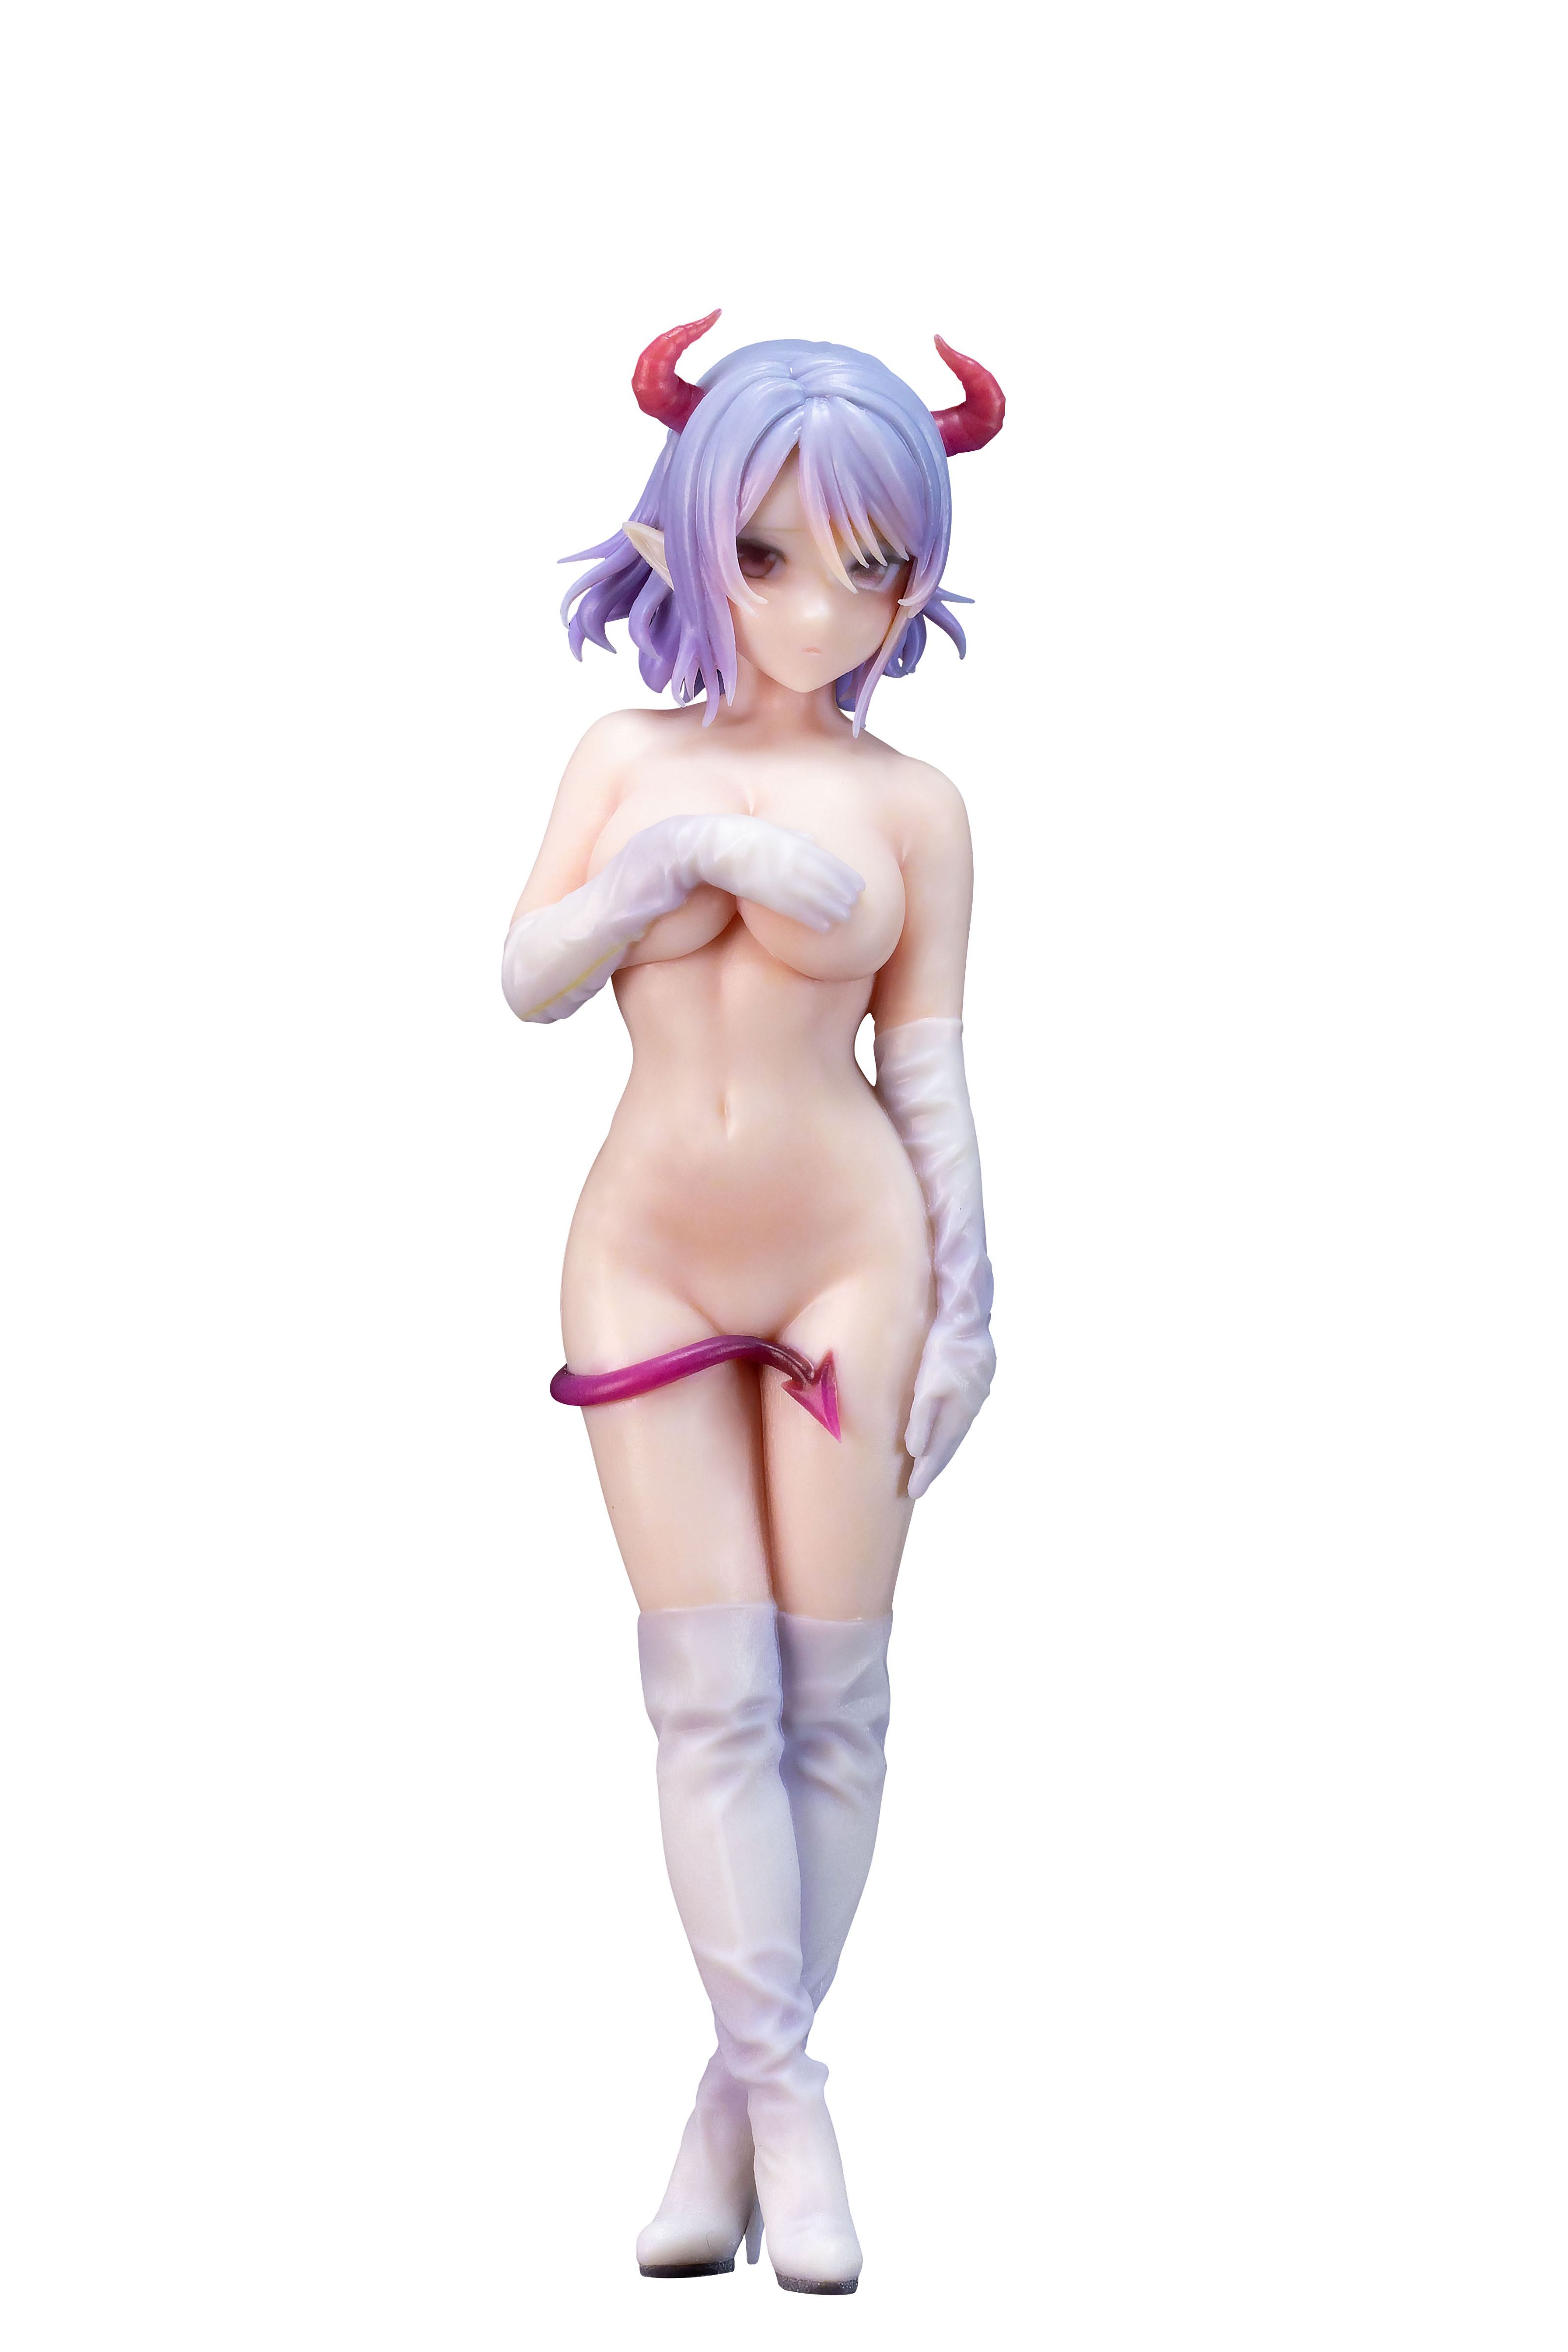 ORIGINAL CHARACTER 1/12 SCALE PRE-PAINTED FIGURE: SUCCUBUS FULL COLOR MOLDING VER. Insight